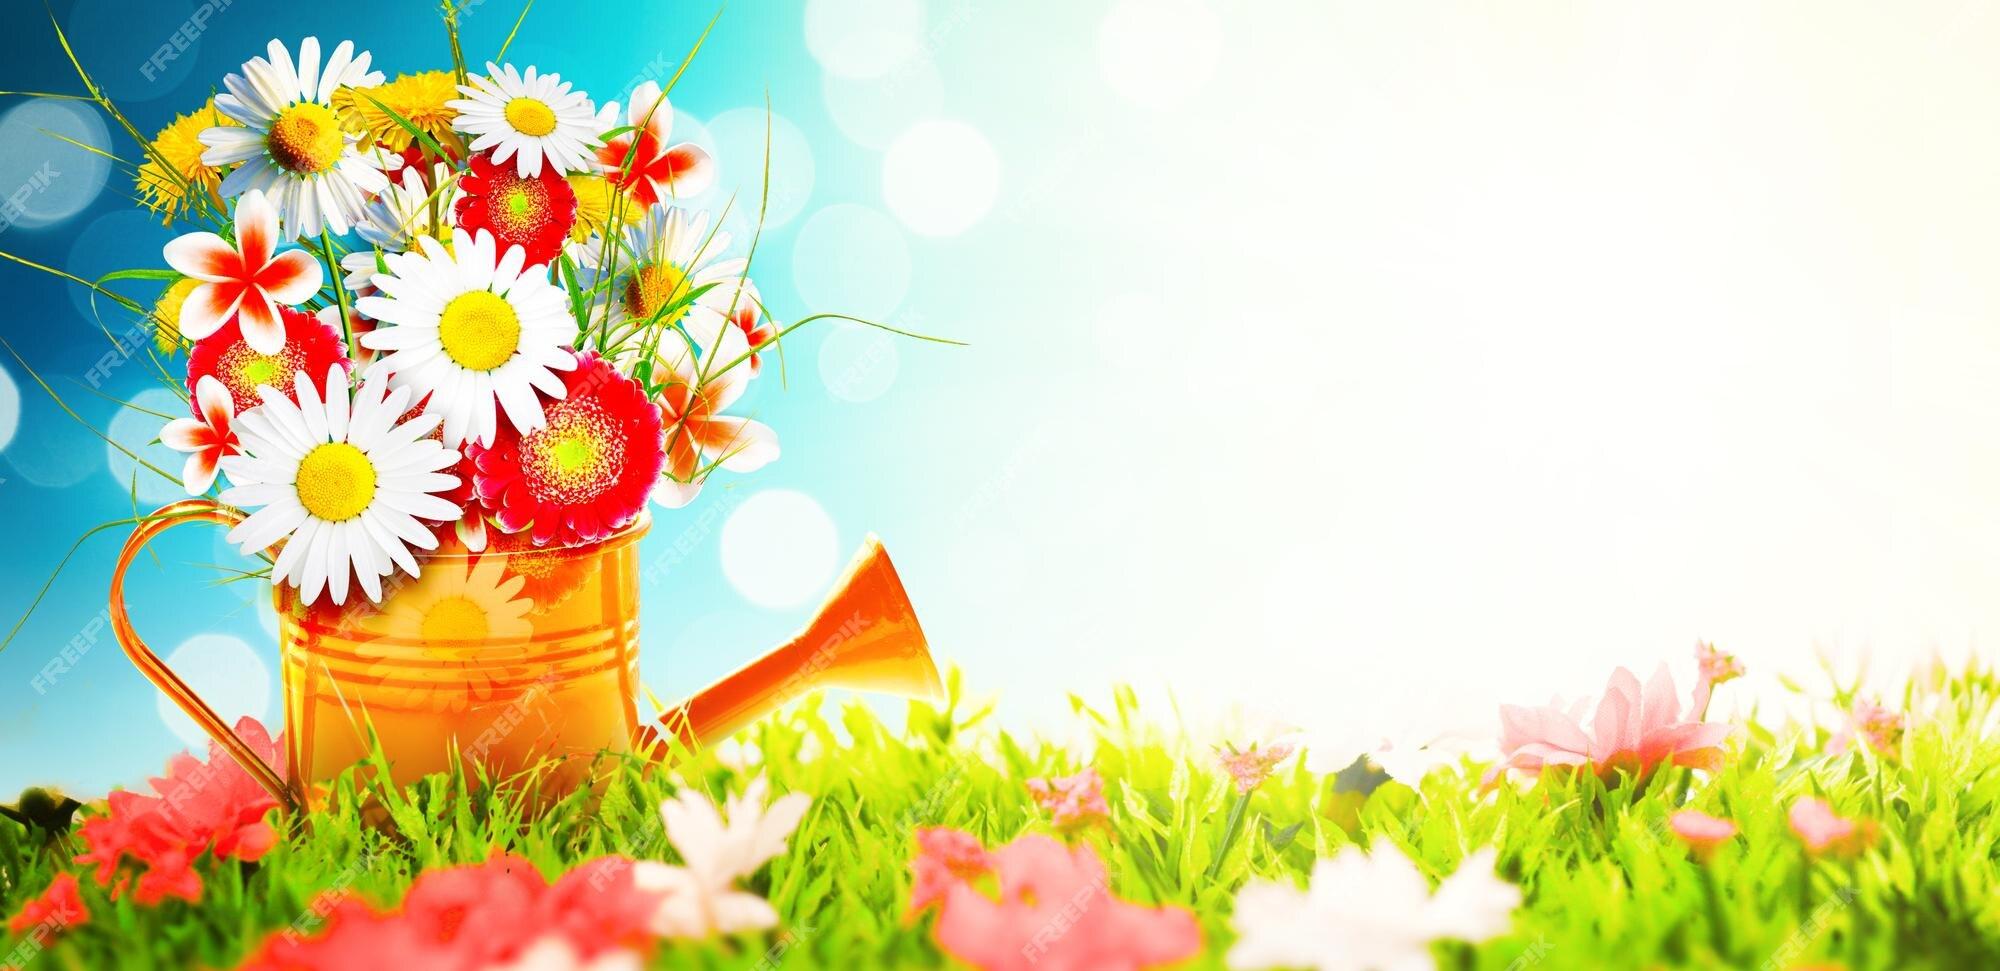 Premium Photo Colorful Wild Flower Bouquet In A Watering Can